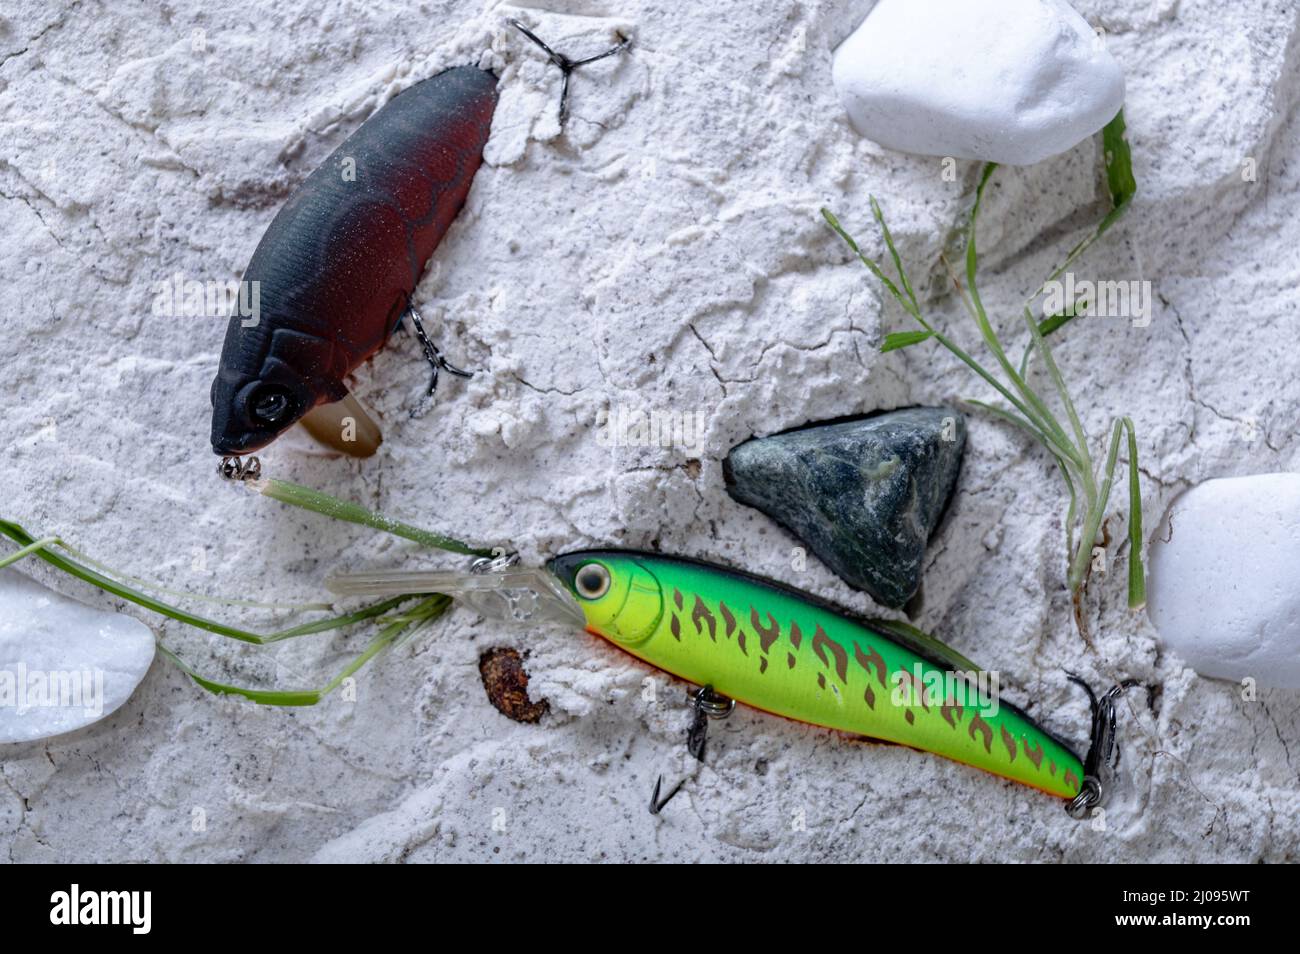 Different lures for fishing in the sand. Wobblers for catching